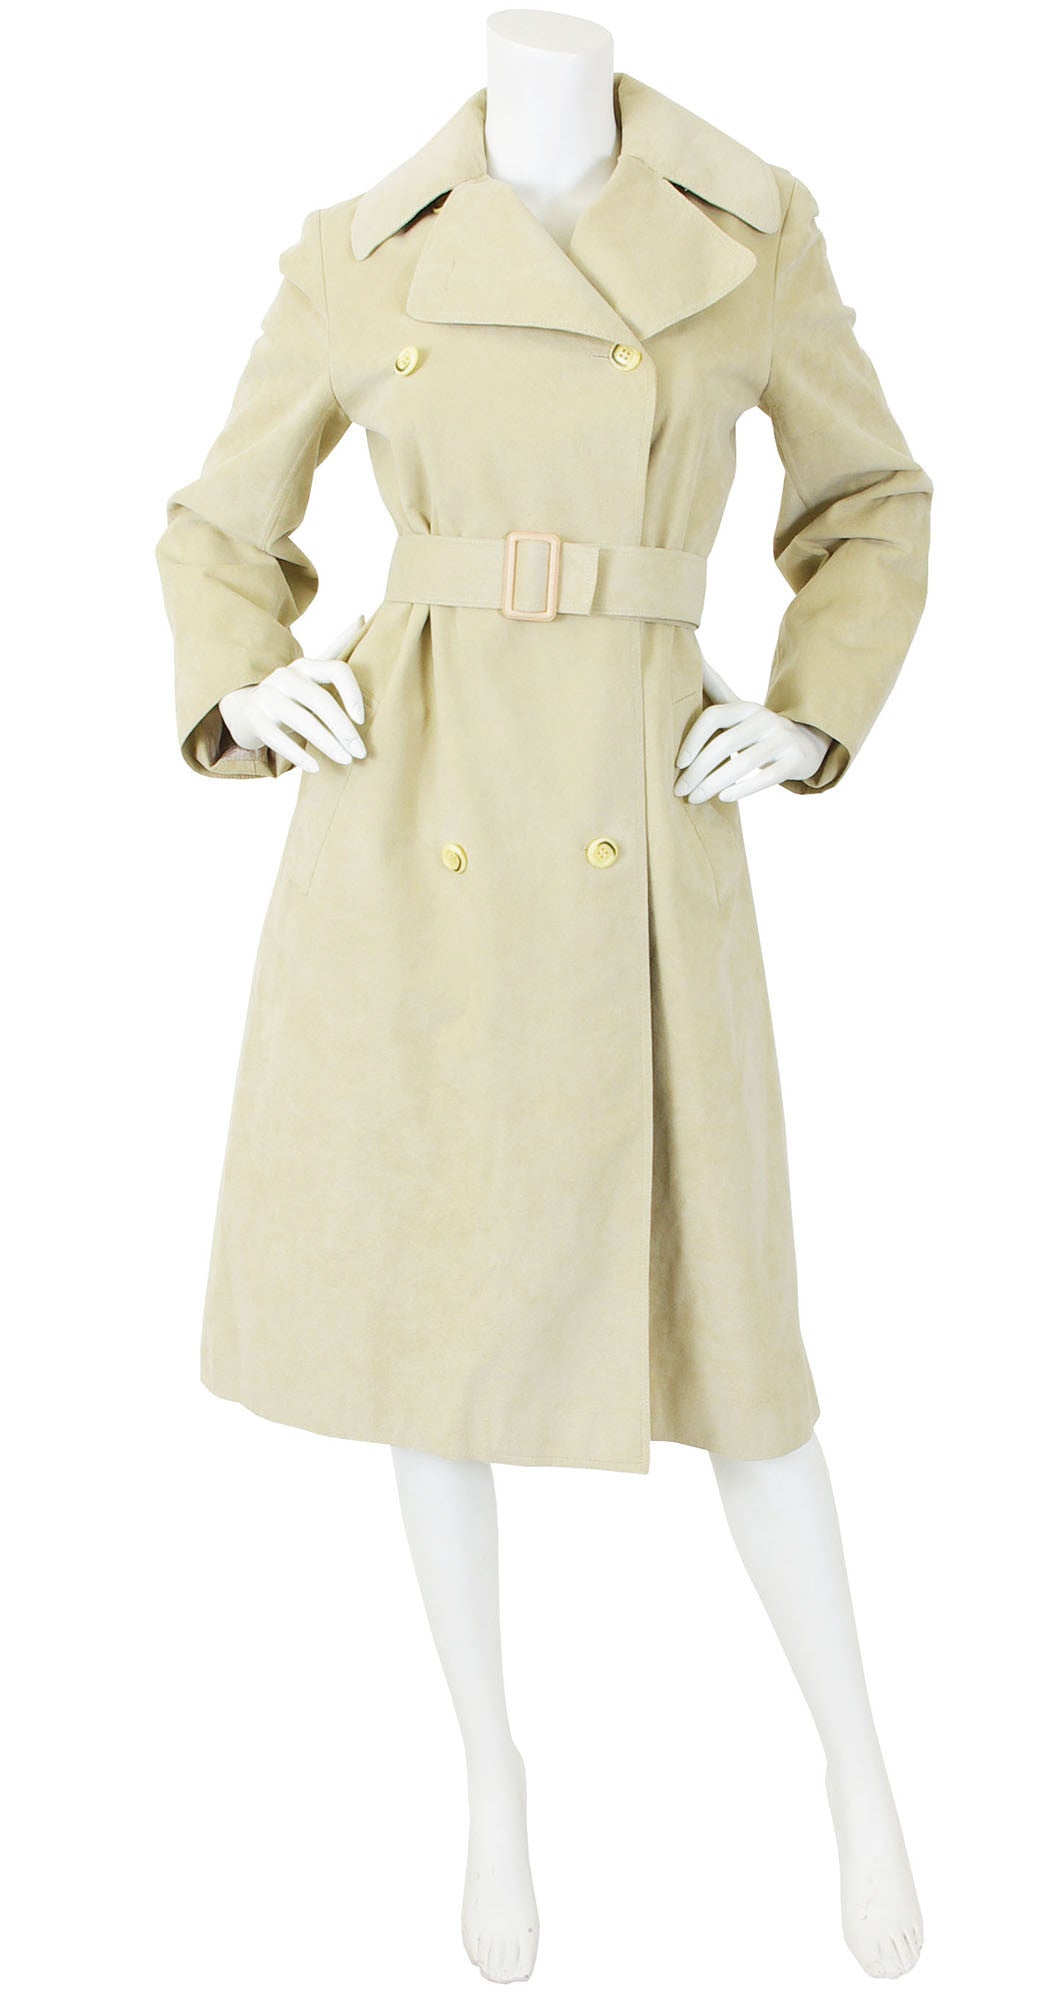 c. 1972 Iconic Beige Ultrasuede Double Breasted Trench Coat